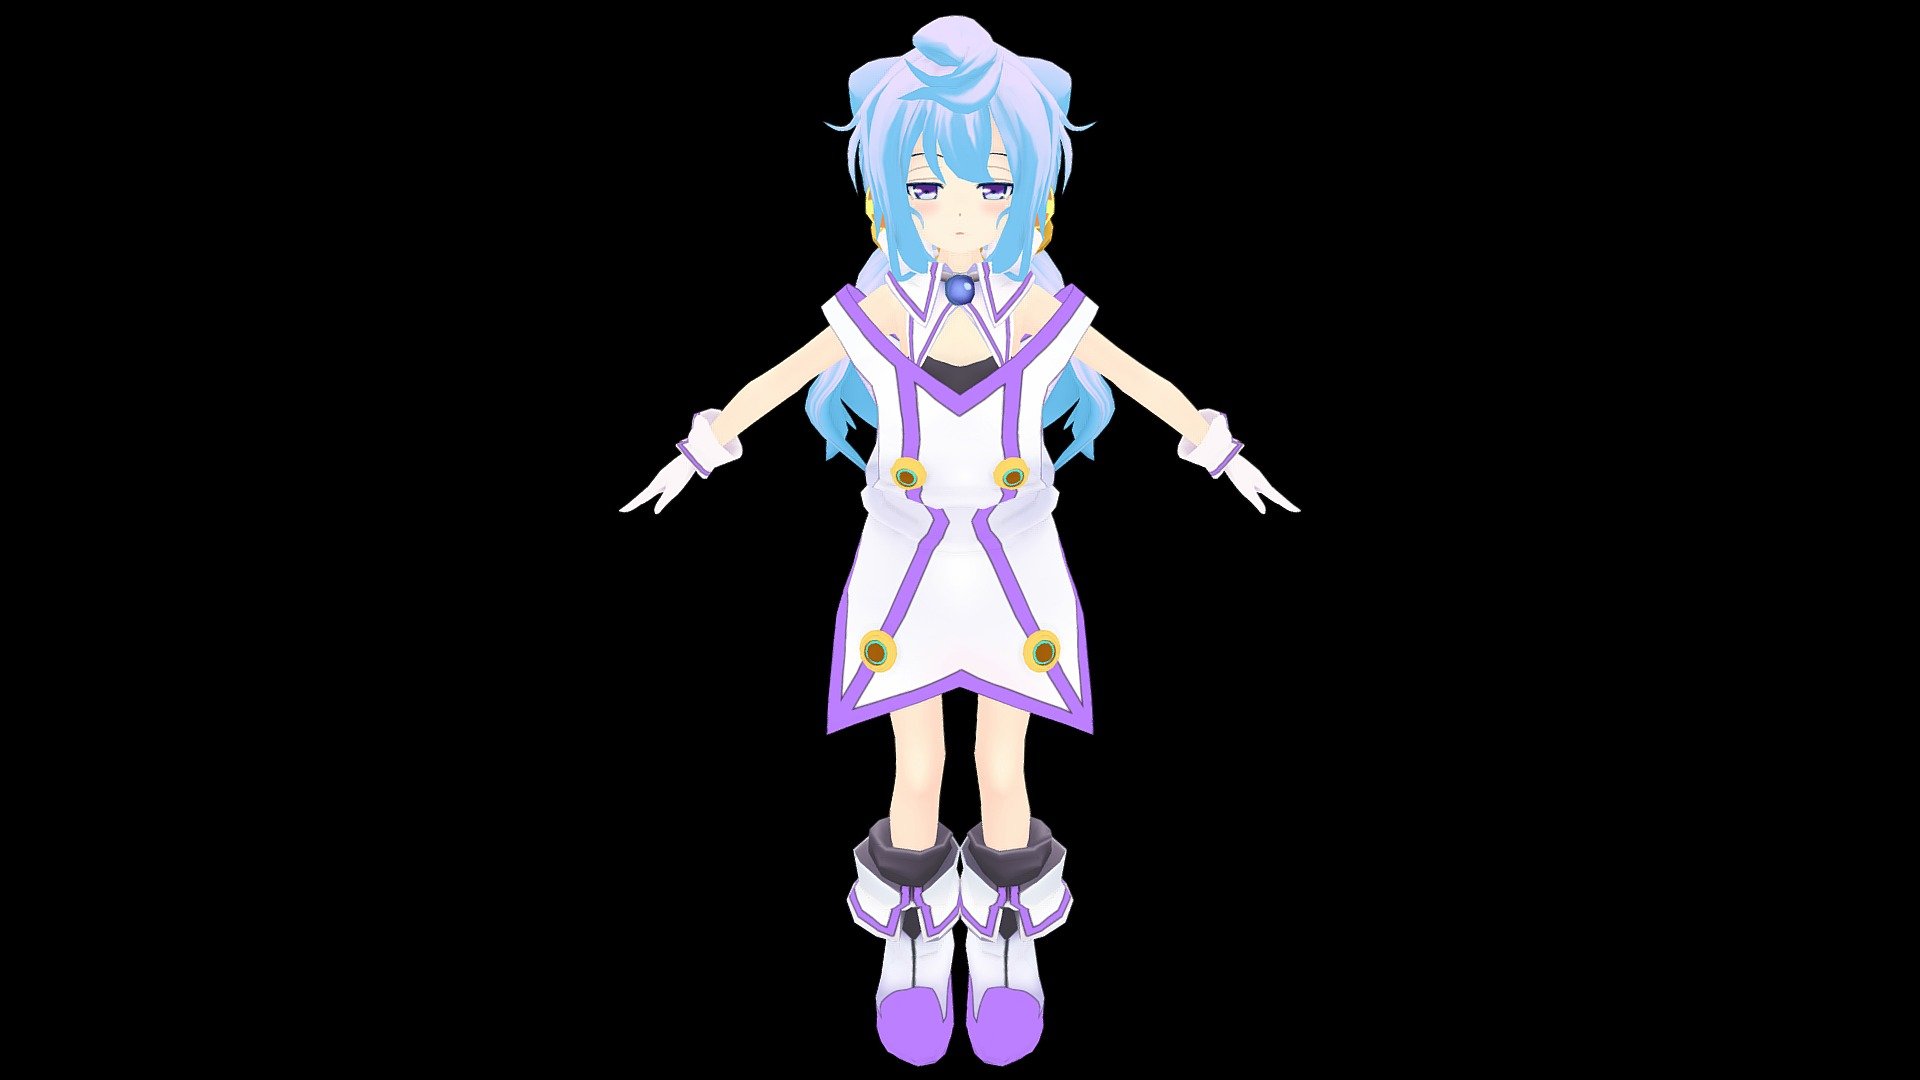 From DeviantArt to Blender to Unity to VRChat.

Here is the link from DeviantArt:
https://saryta-chan.deviantart.com/art/Hacka-Doll-3-MMD-DL-568825159

Here is the link from VRCMods:
https://vrcmods.com/item/529-Hacka-Doll-3 - Hacka Doll 3 - Download Free 3D model by Tiago.Carneiro 3d model